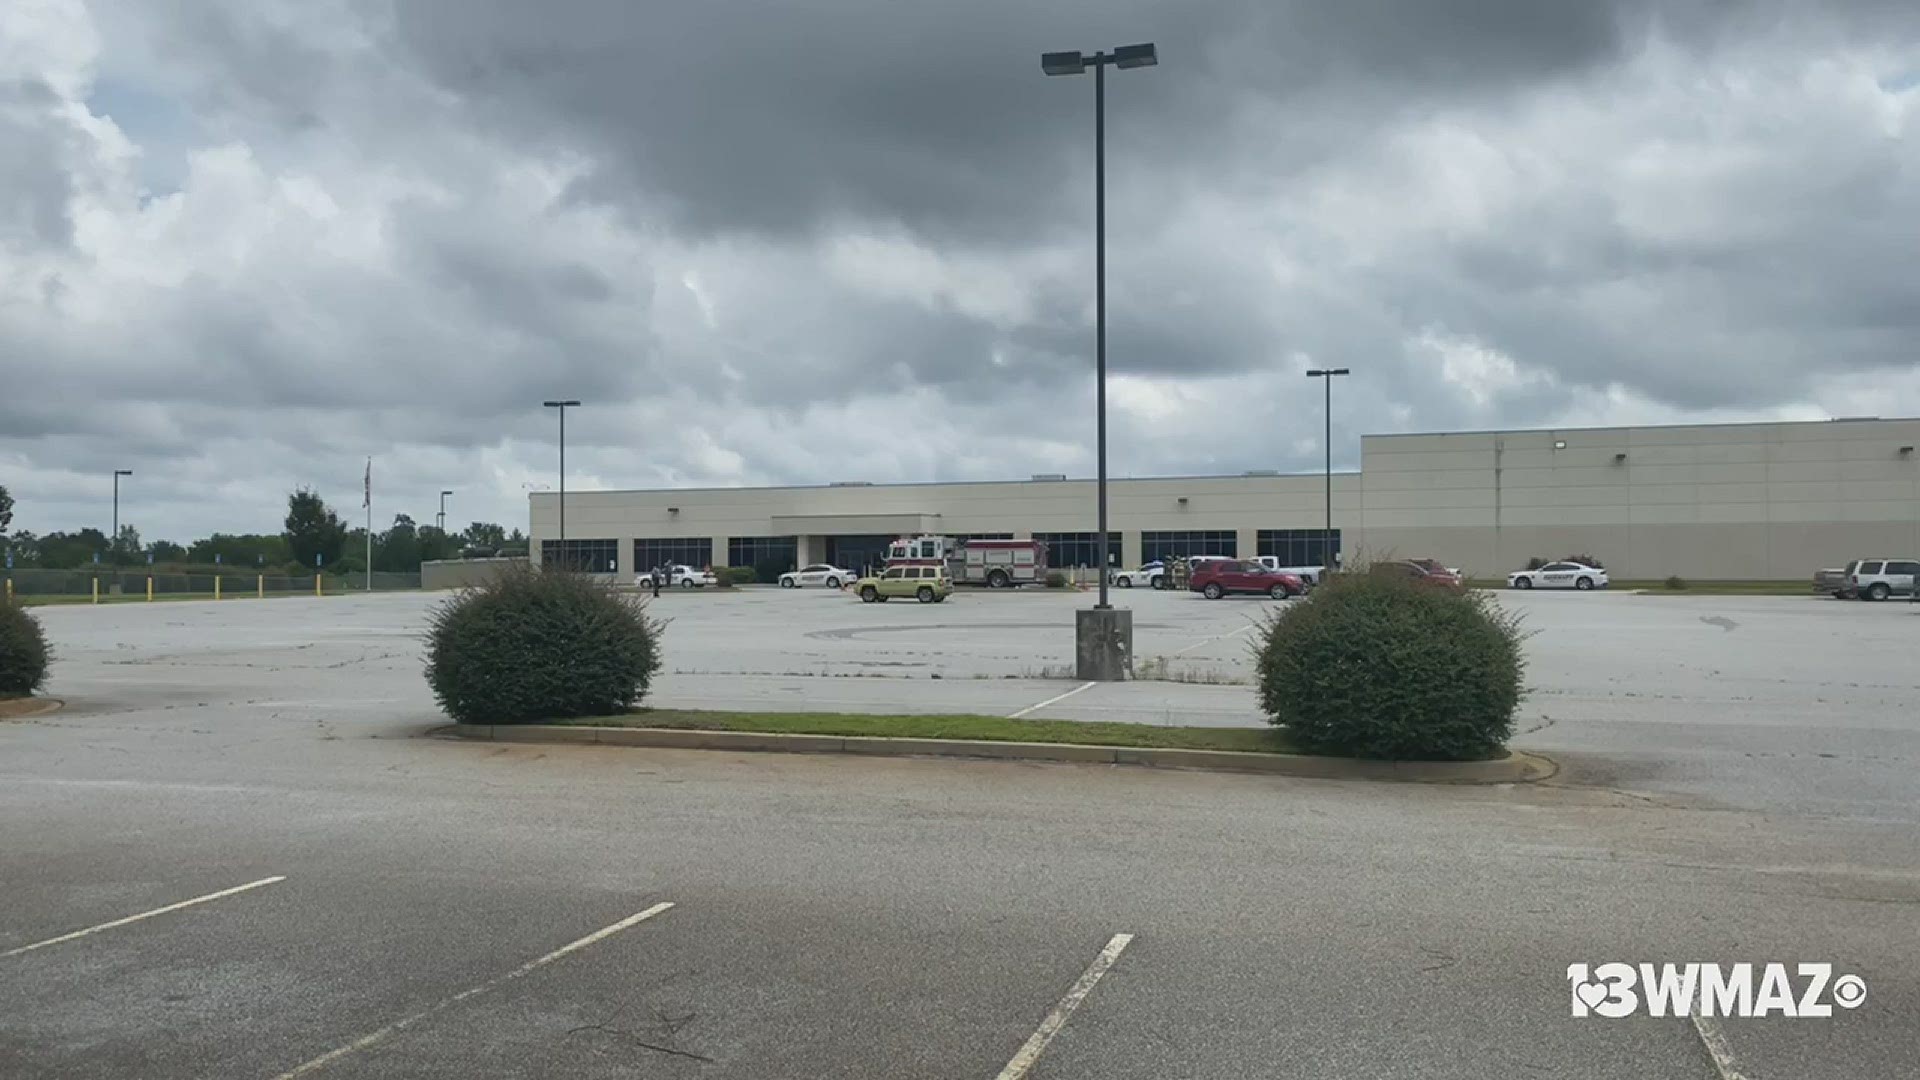 Macon-Bibb County sheriff’s office deputies are at the Kohl’s Distribution Center in Macon on Monday.